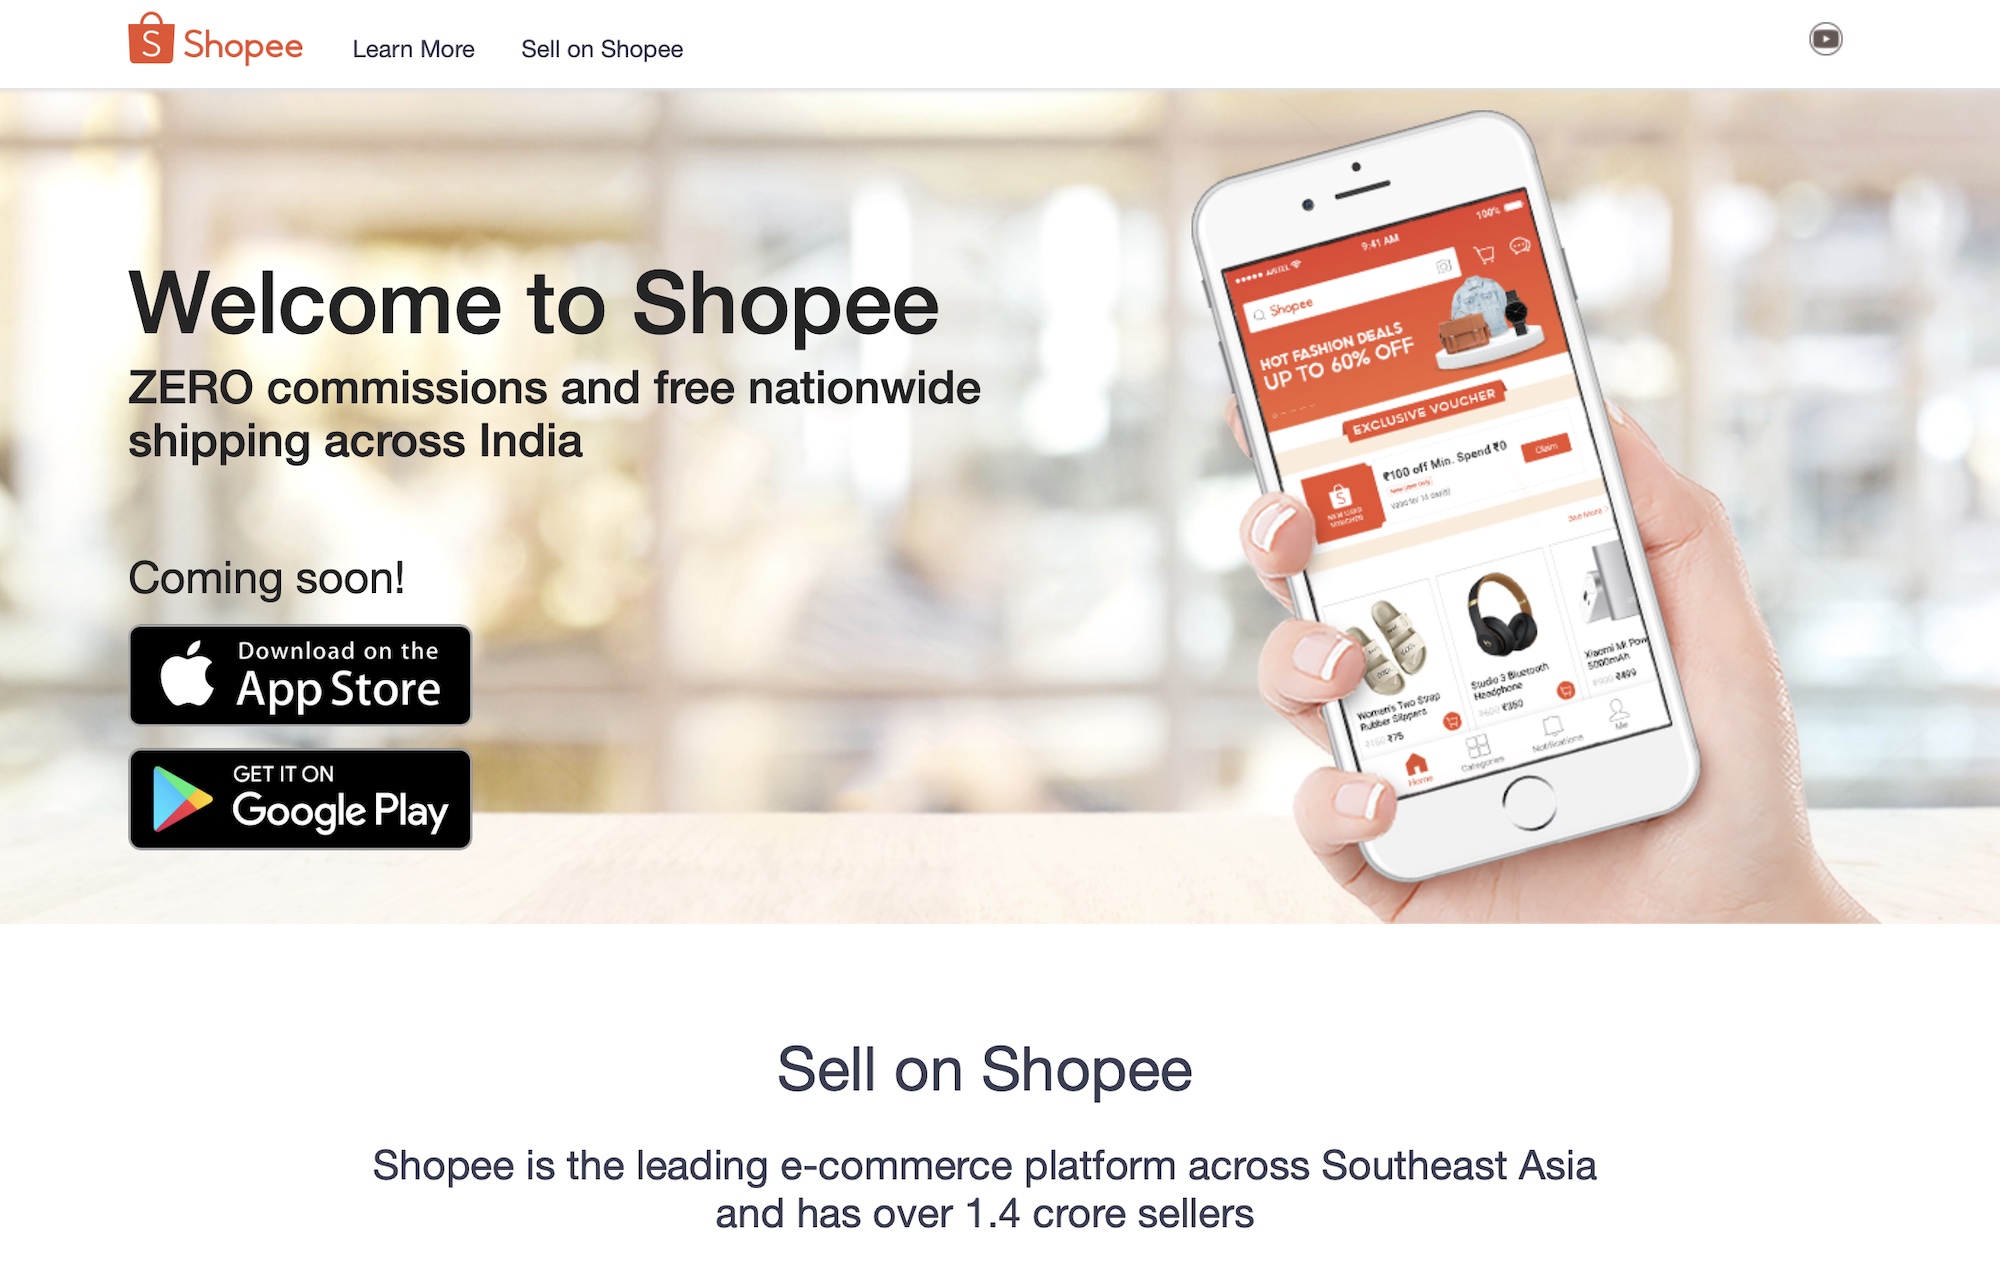 Sea's Shopee begins recruiting sellers in India, quietly launches website |  TechCrunch